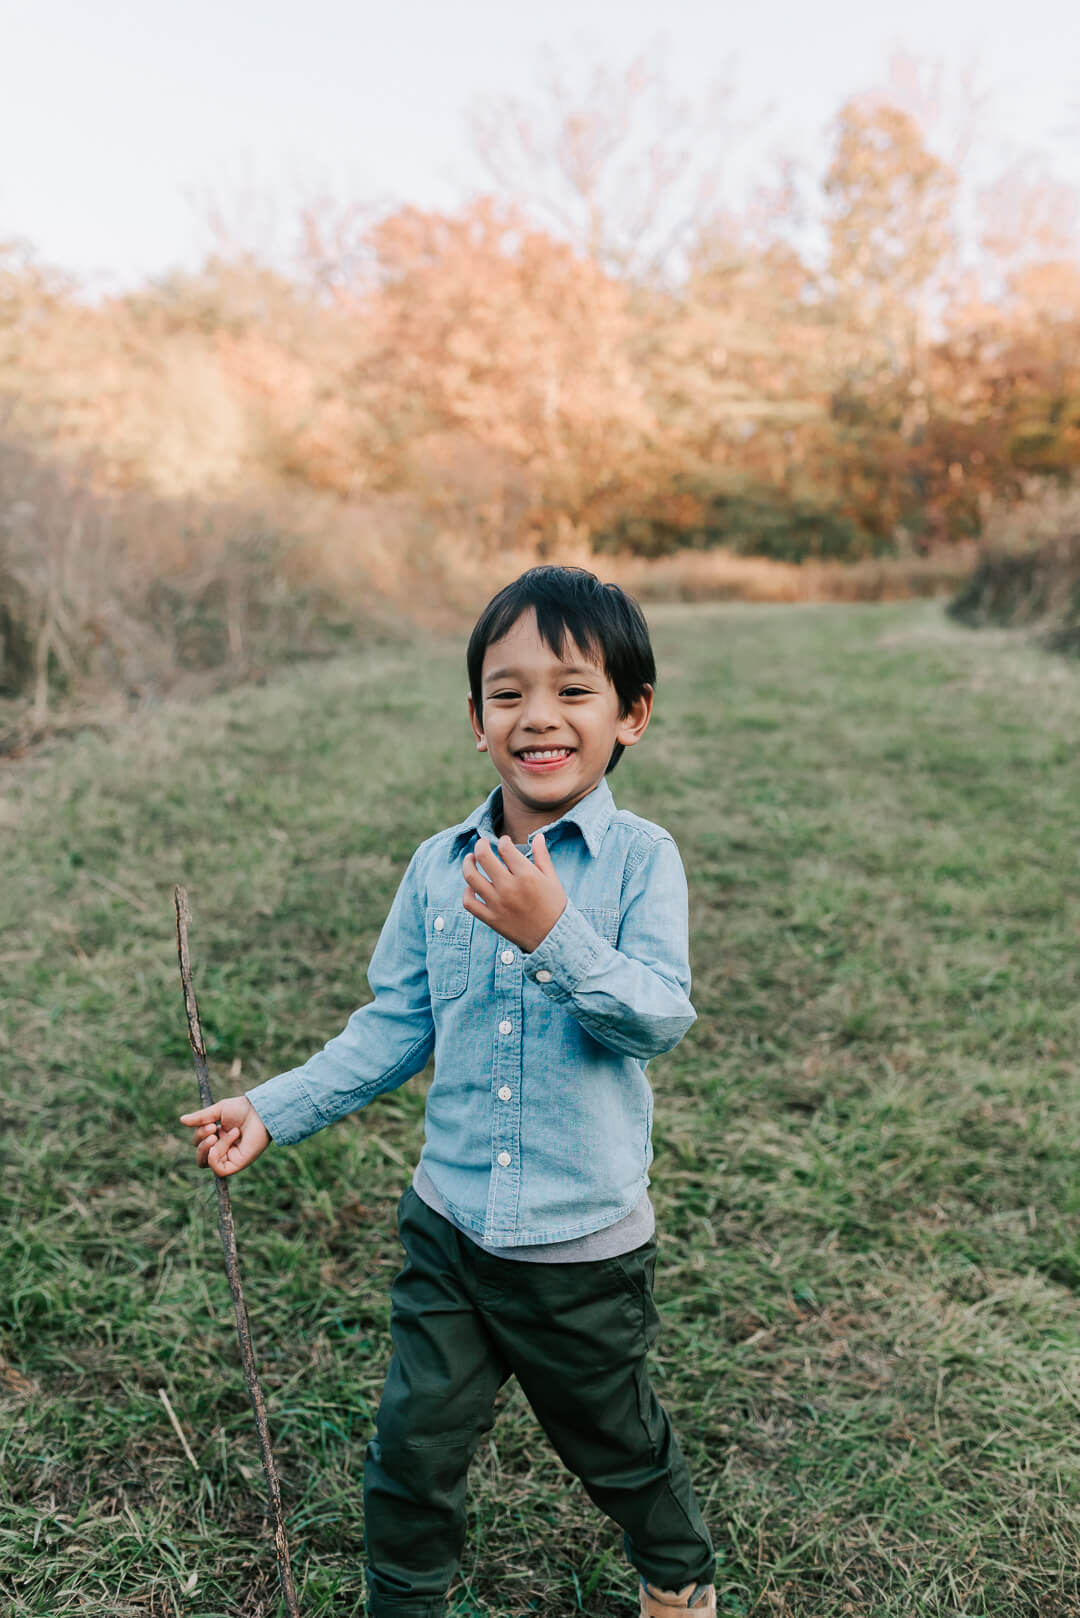 A young boy plays with a stick and laughs while walking through a grassy trail after visiting a falls church pediatric dentistry